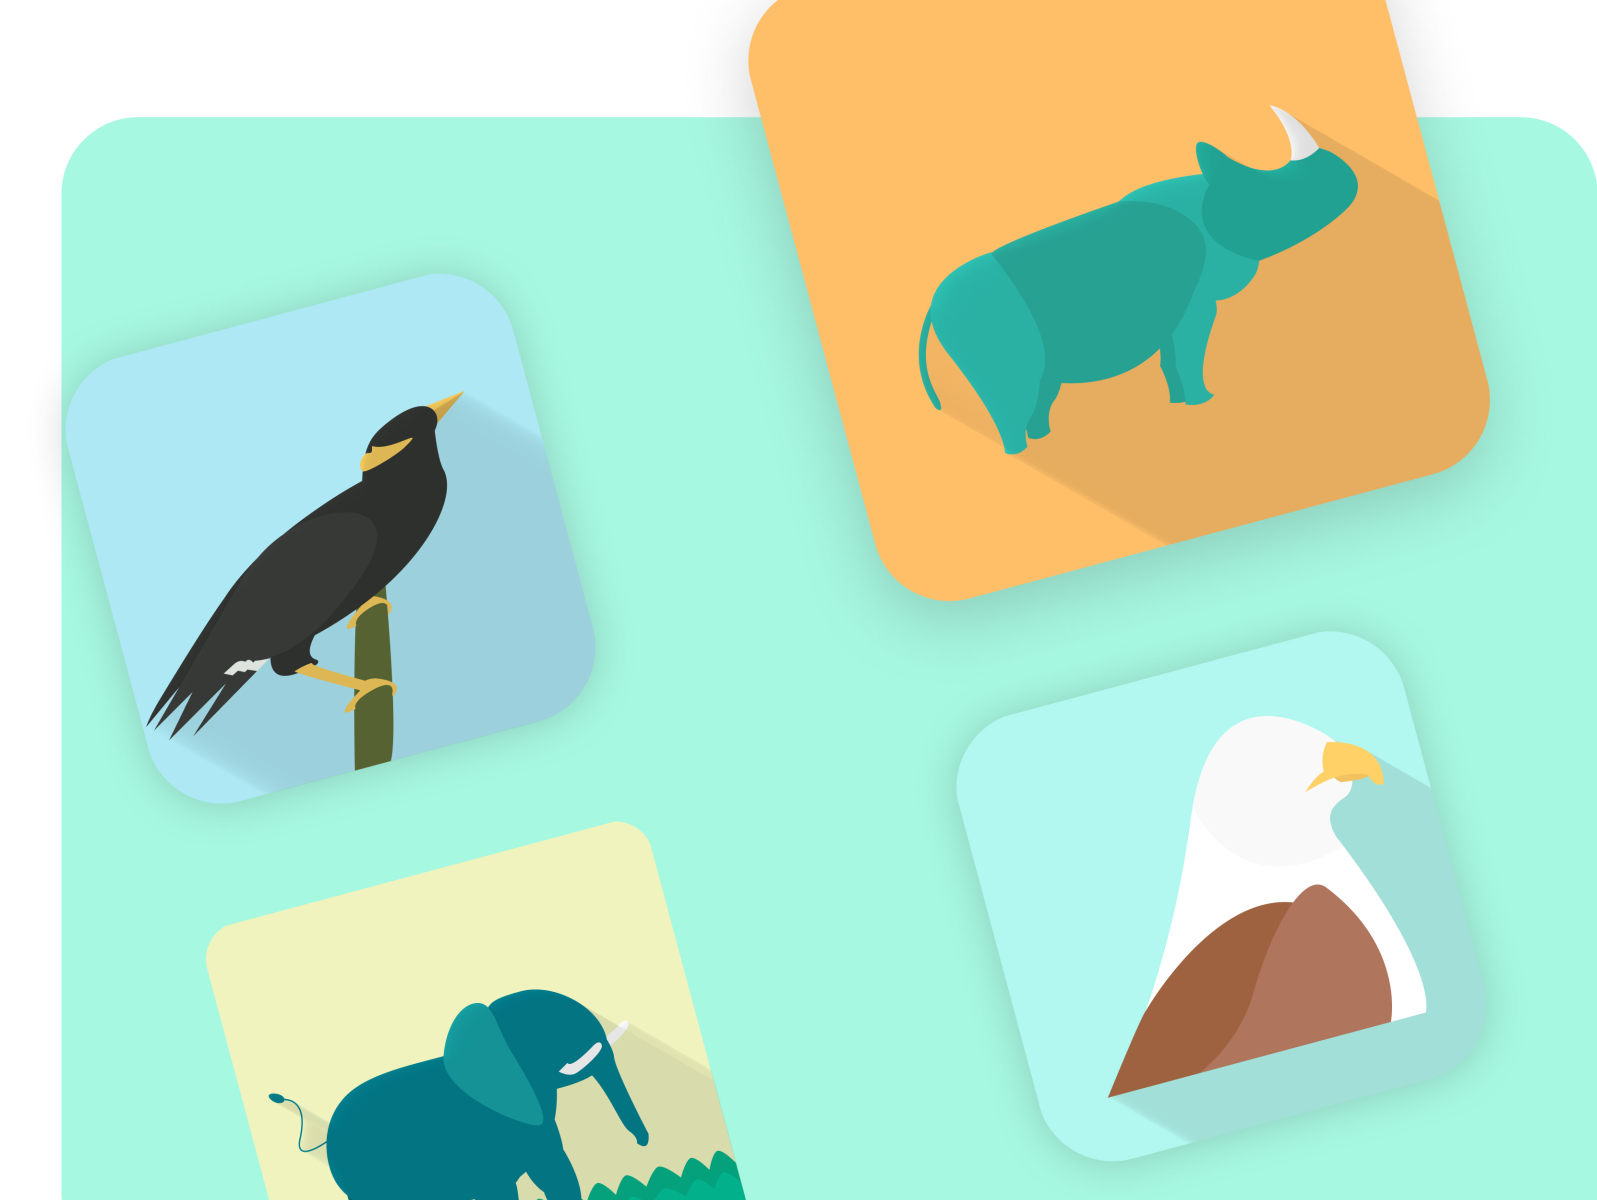 Endangered Animals In Indonesia By I Gede Agus Surya Negara On Dribbble